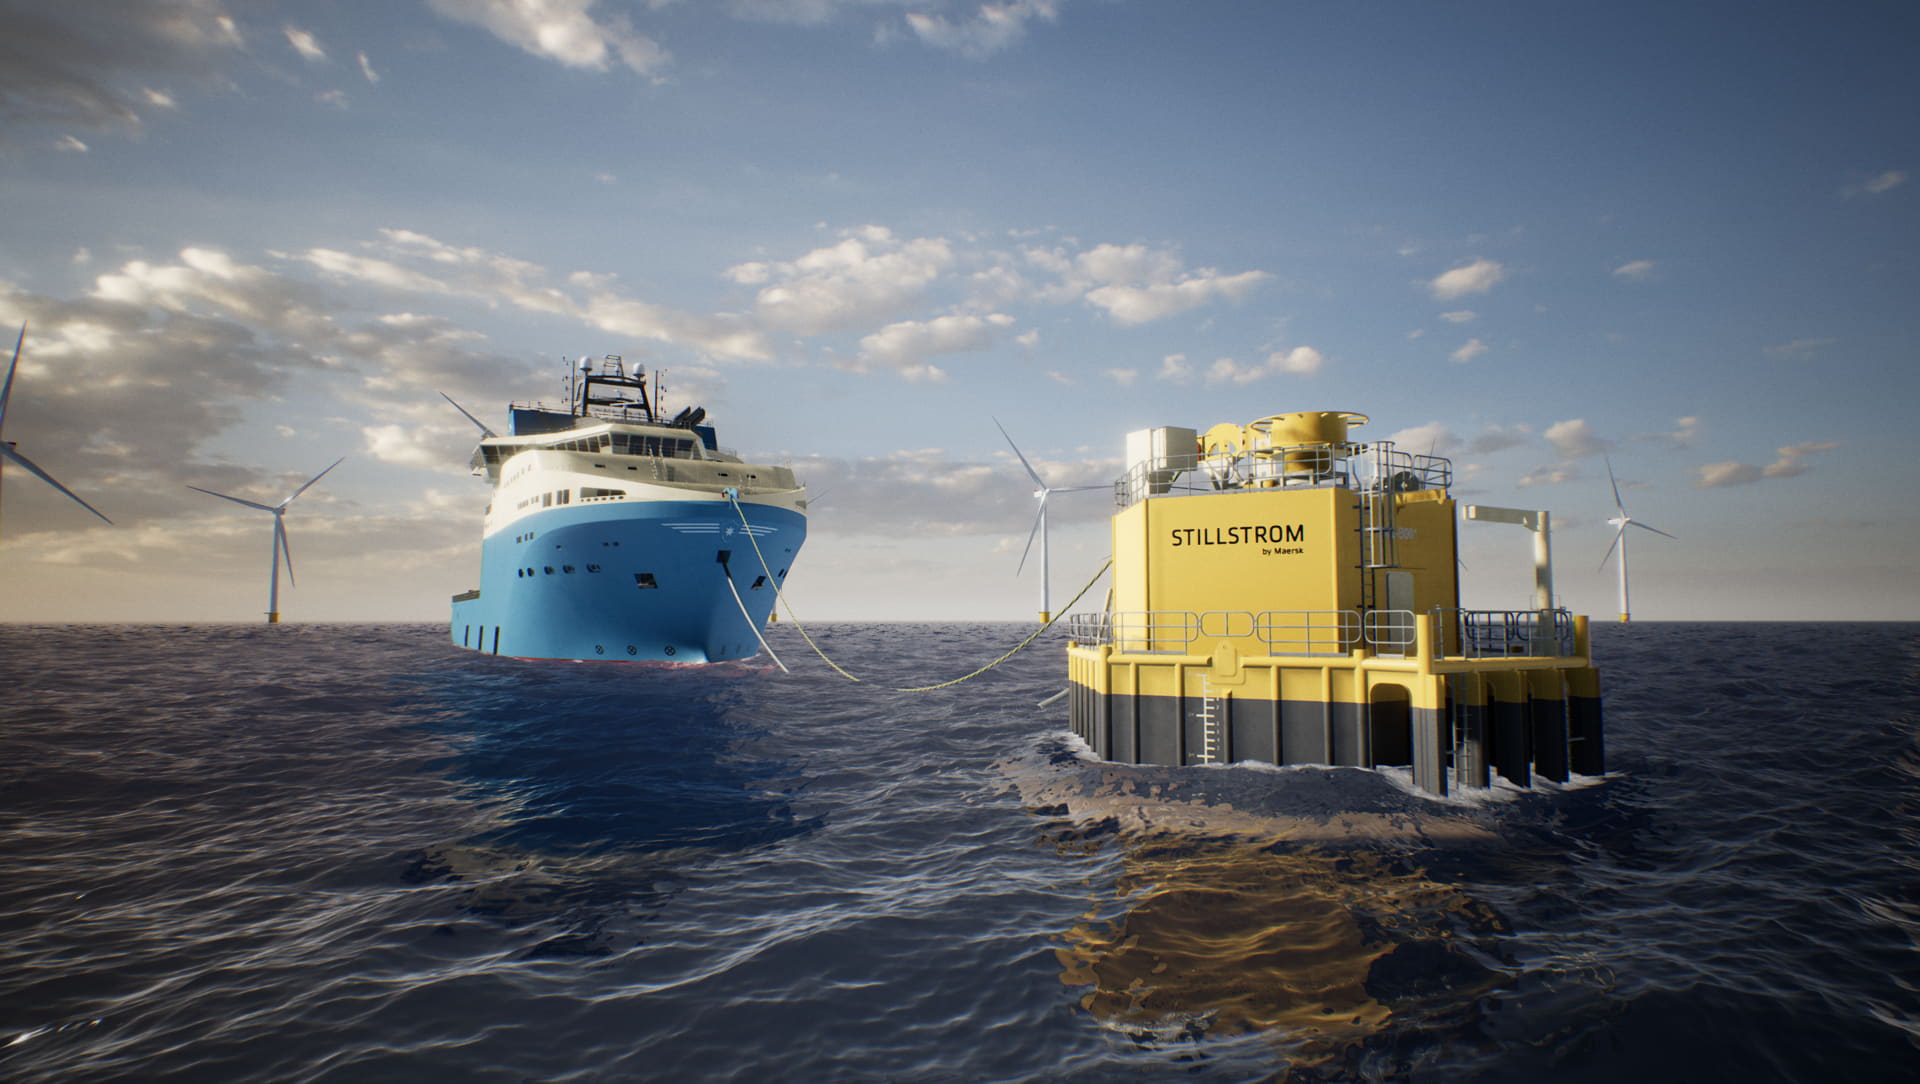 An image rendering of the Stillstrom offshore charging solution